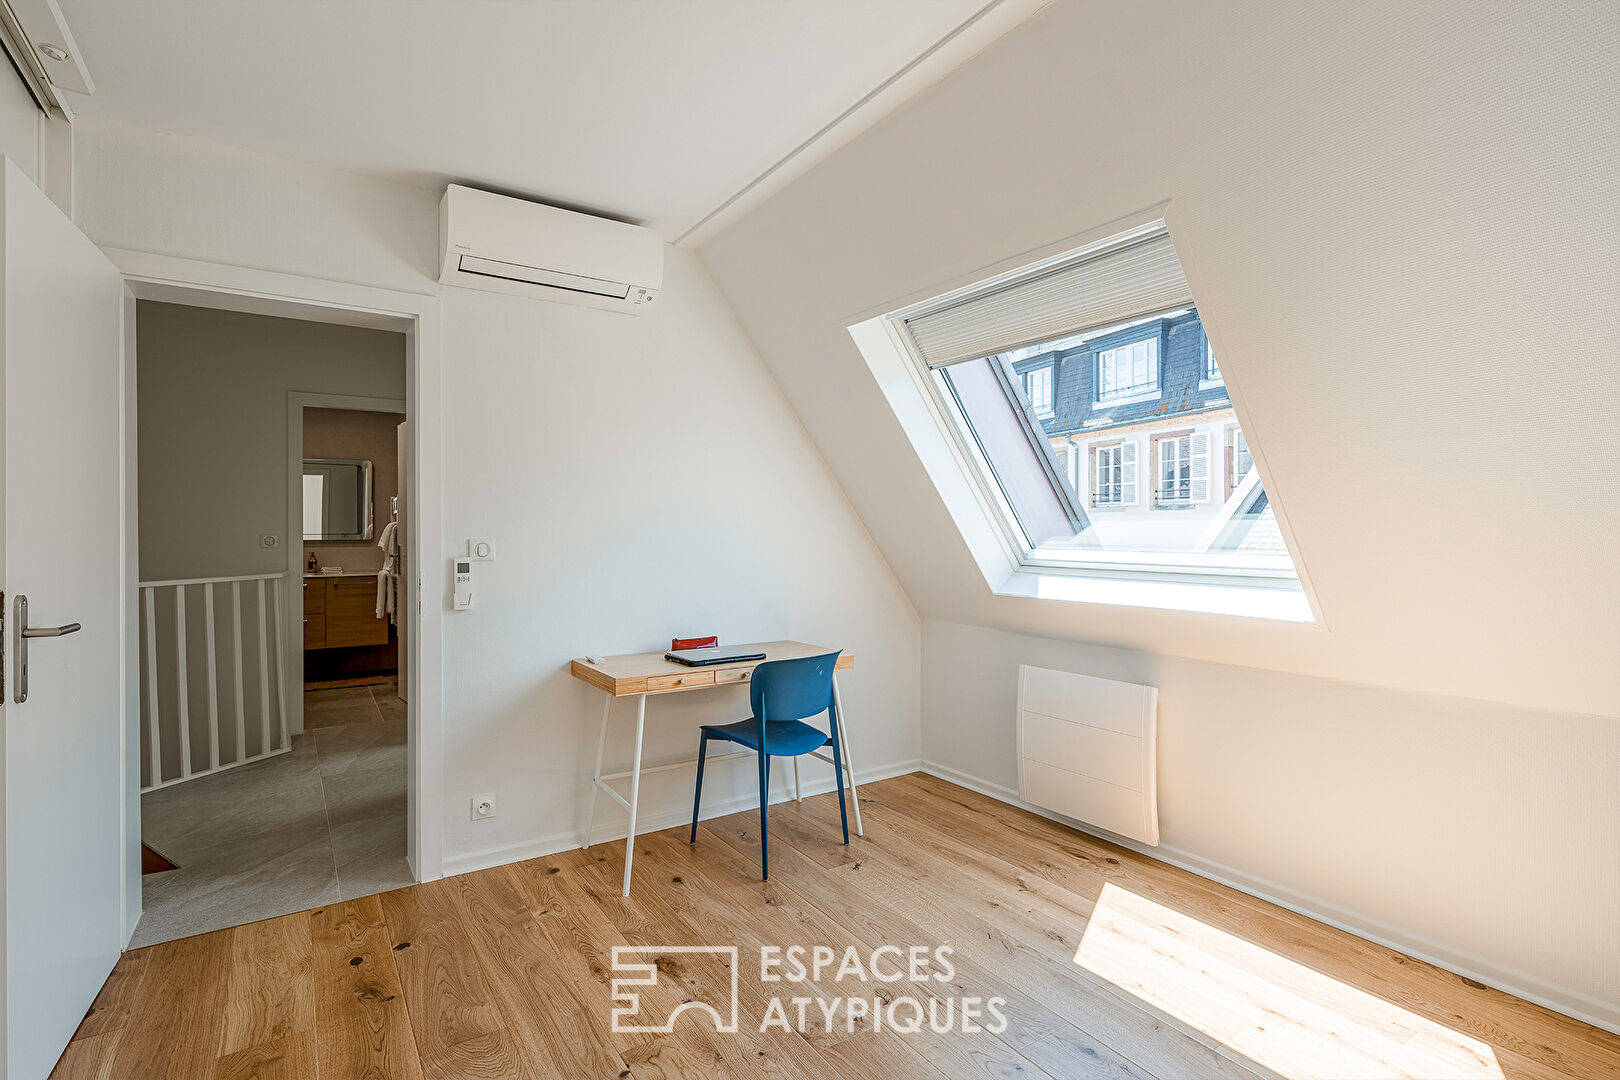 Renovated maisonette apartment with terrace in the city centre